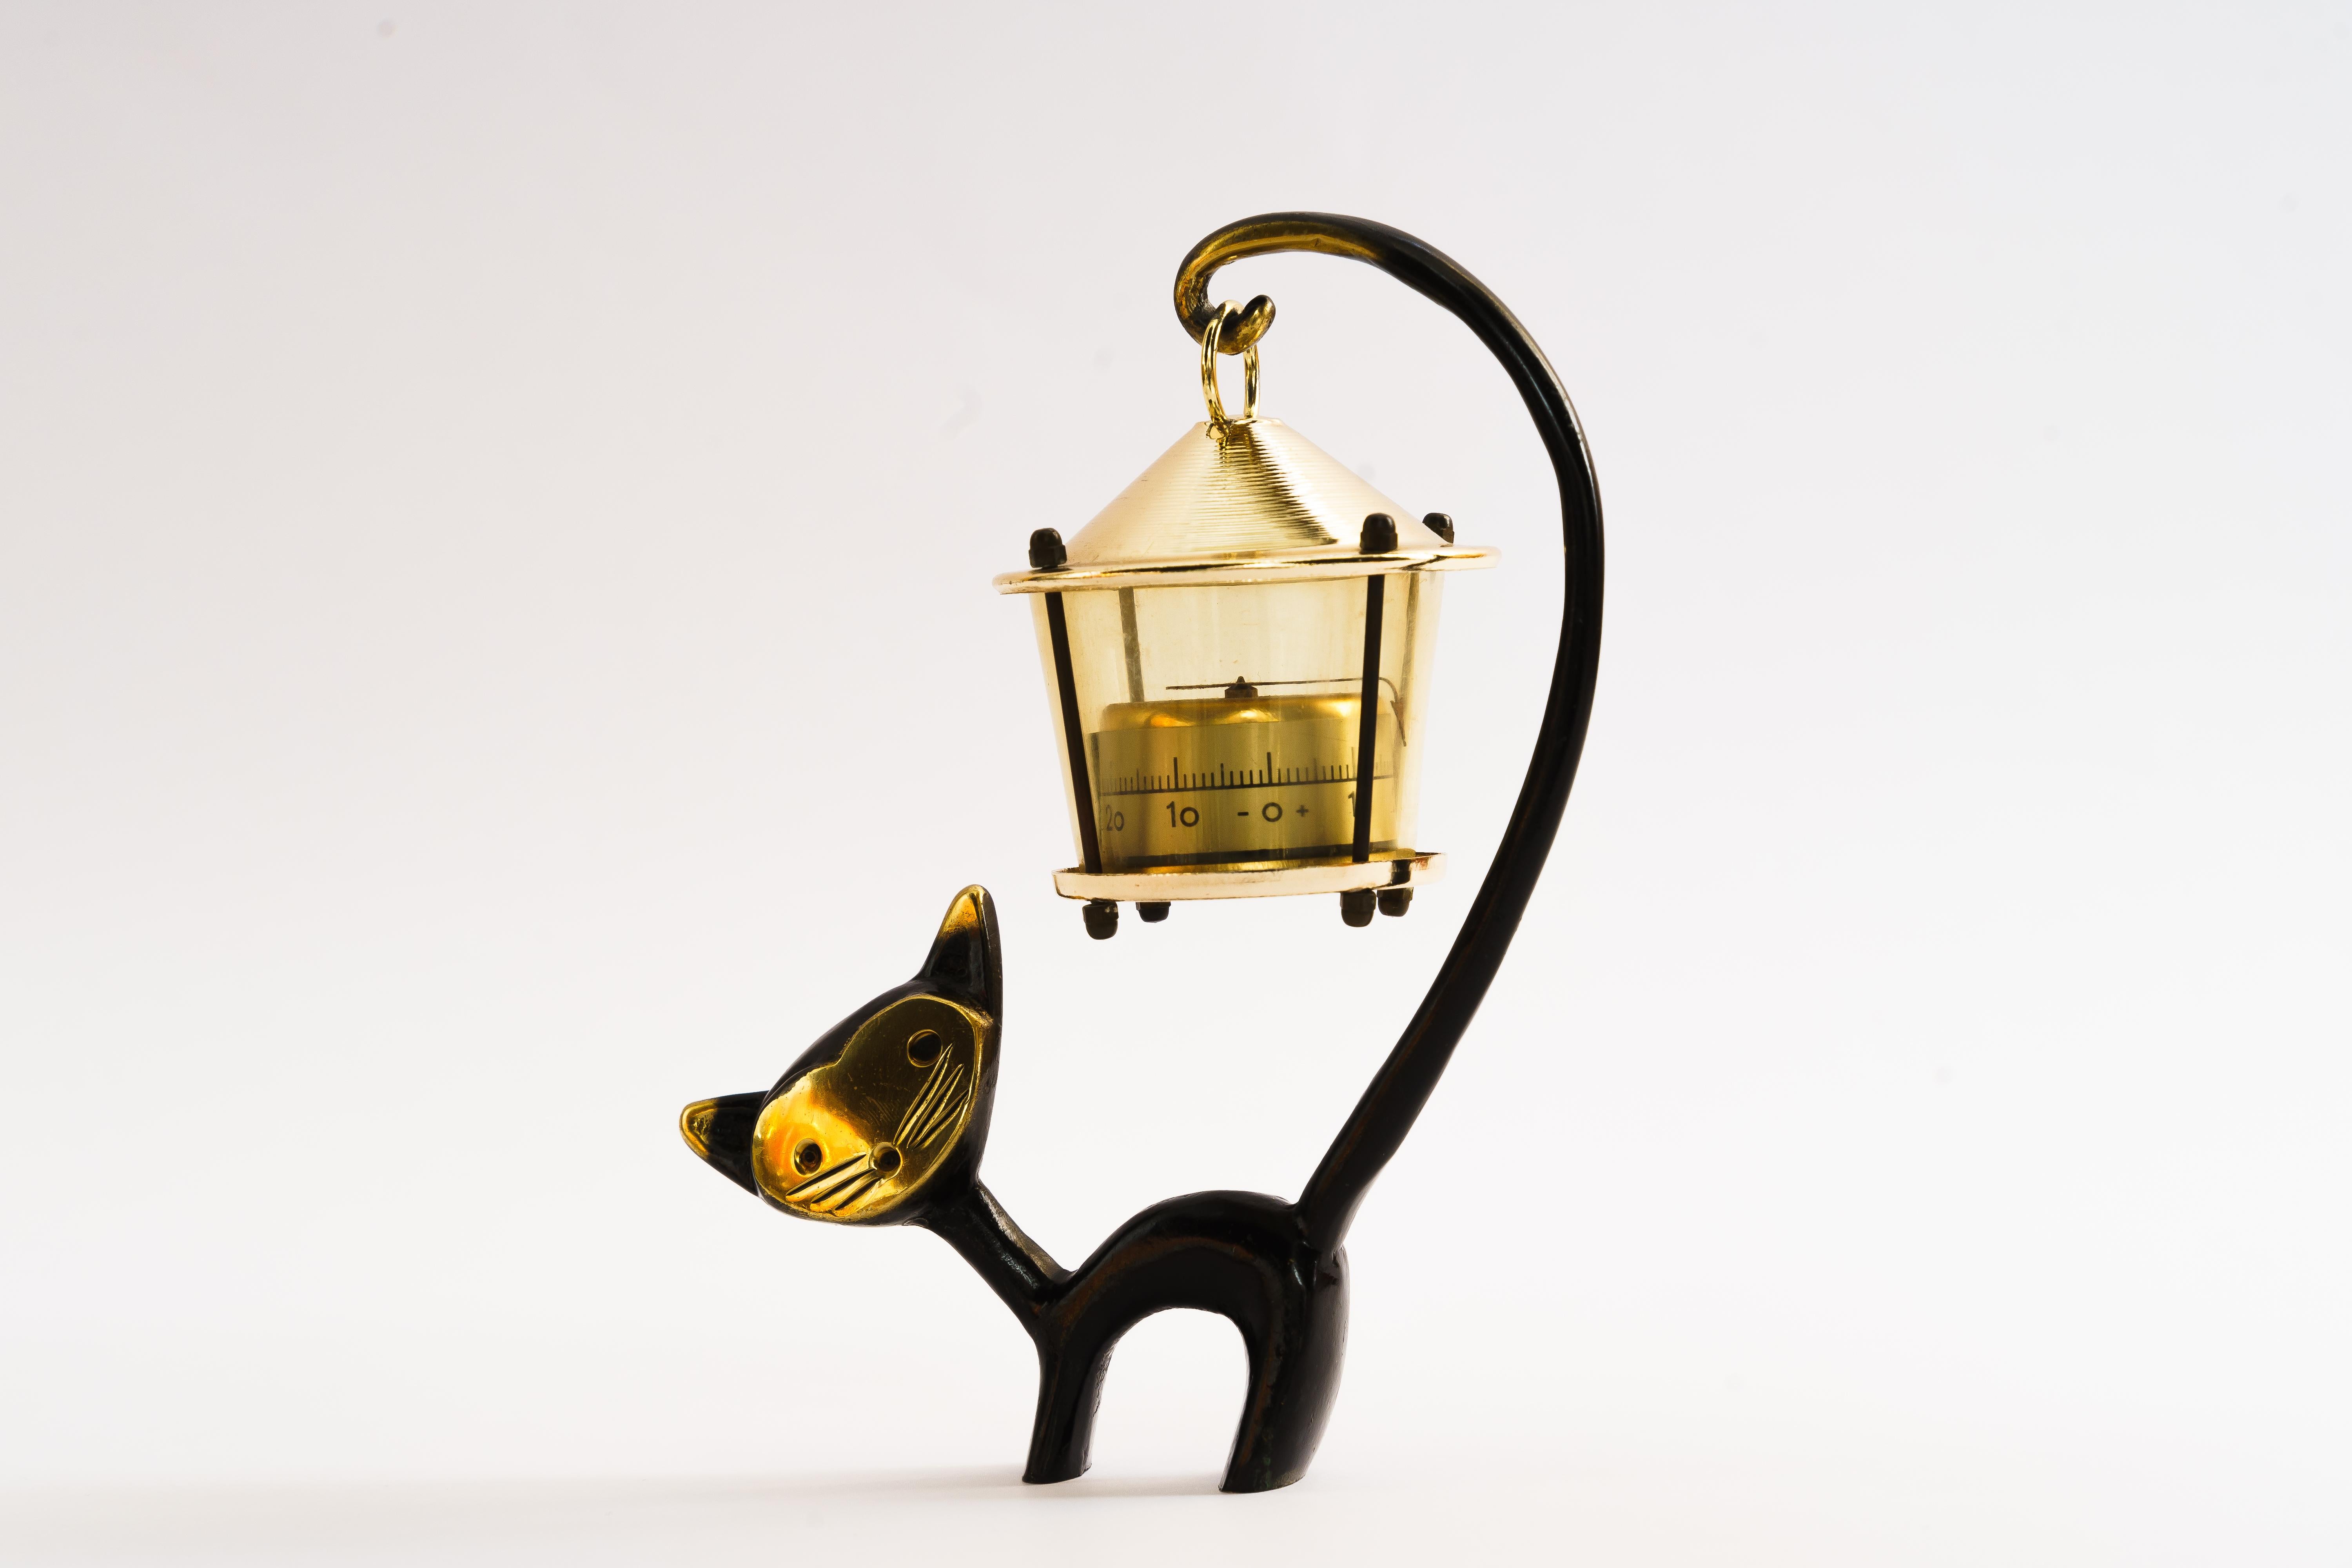 A very charming Austrian desk thermometer, consisting of a nice cat figurine and a lantern-shaped thermometer. 
A very humorous design by Walter Bosse, executed by Hertha Baller Austria in the 1950s. 
Made of brass, in good condition.